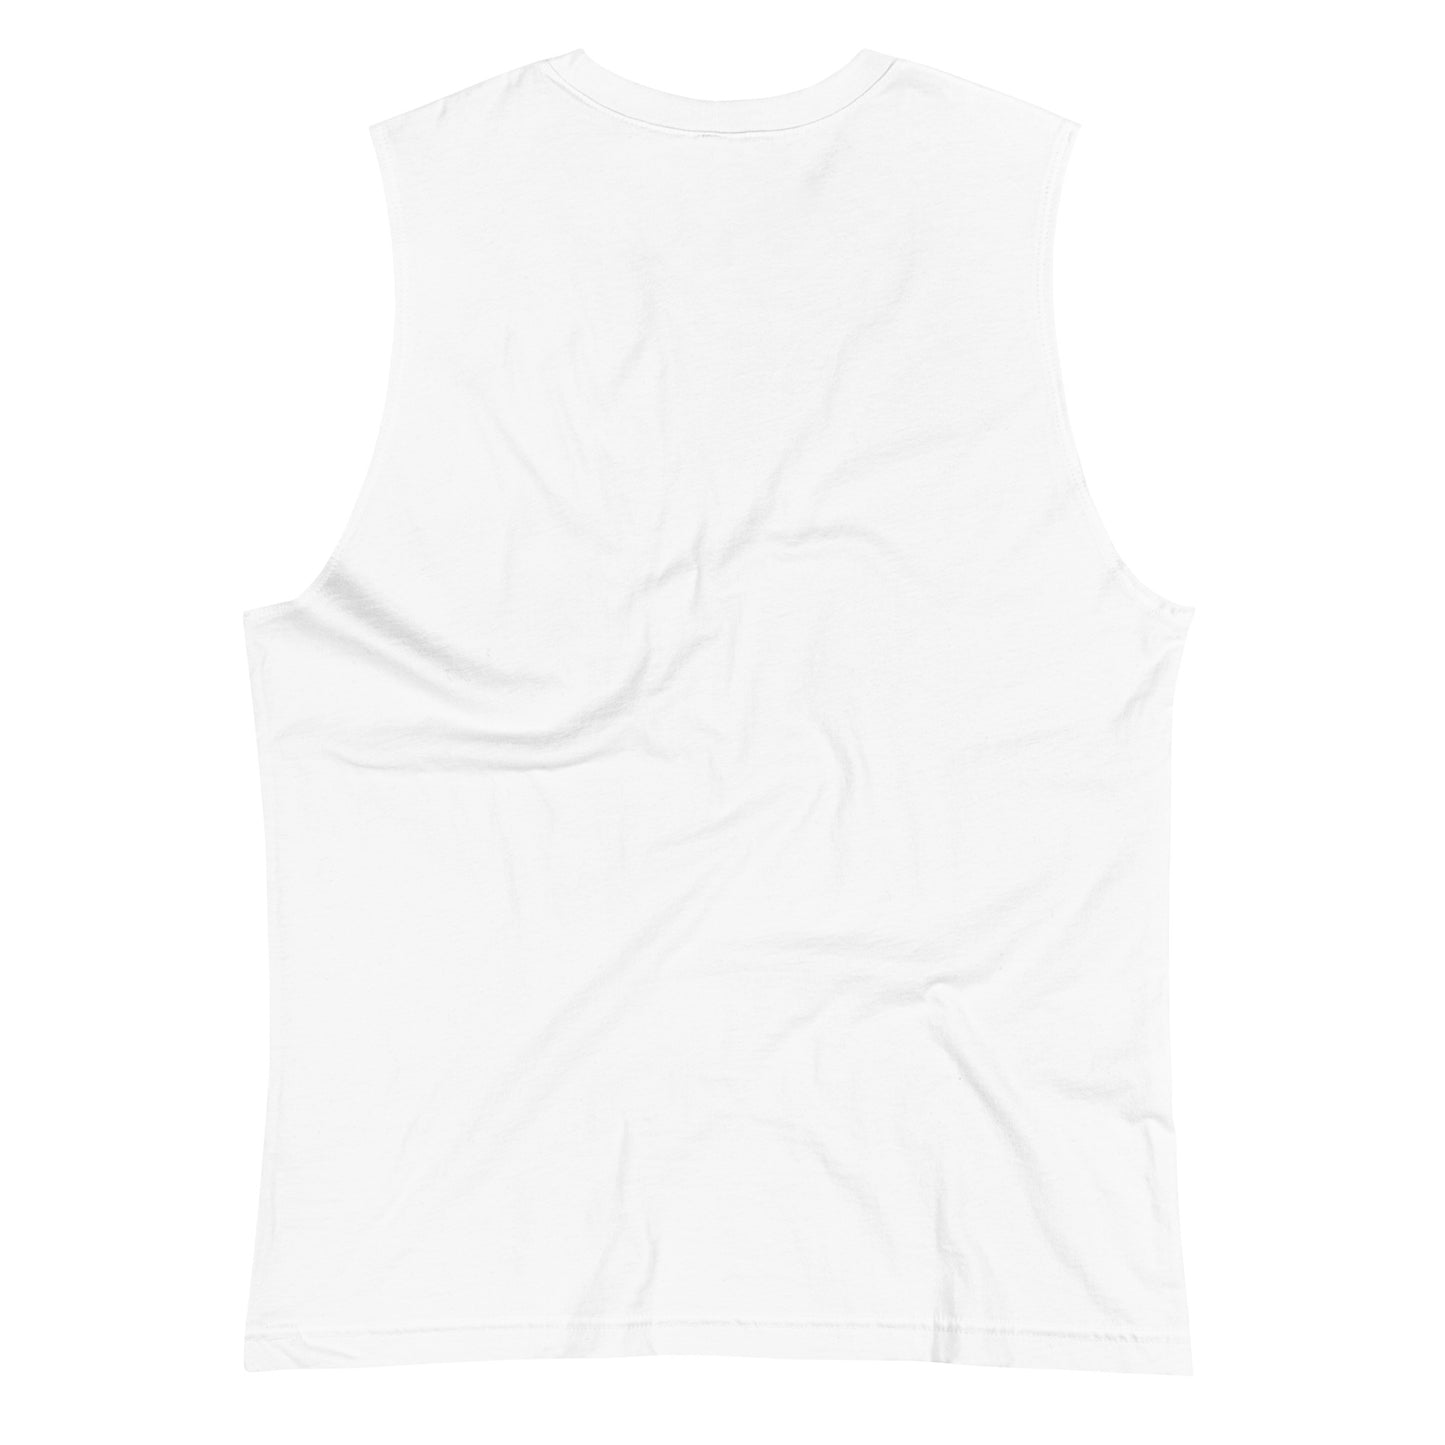 STAND OUT Muscle Shirt